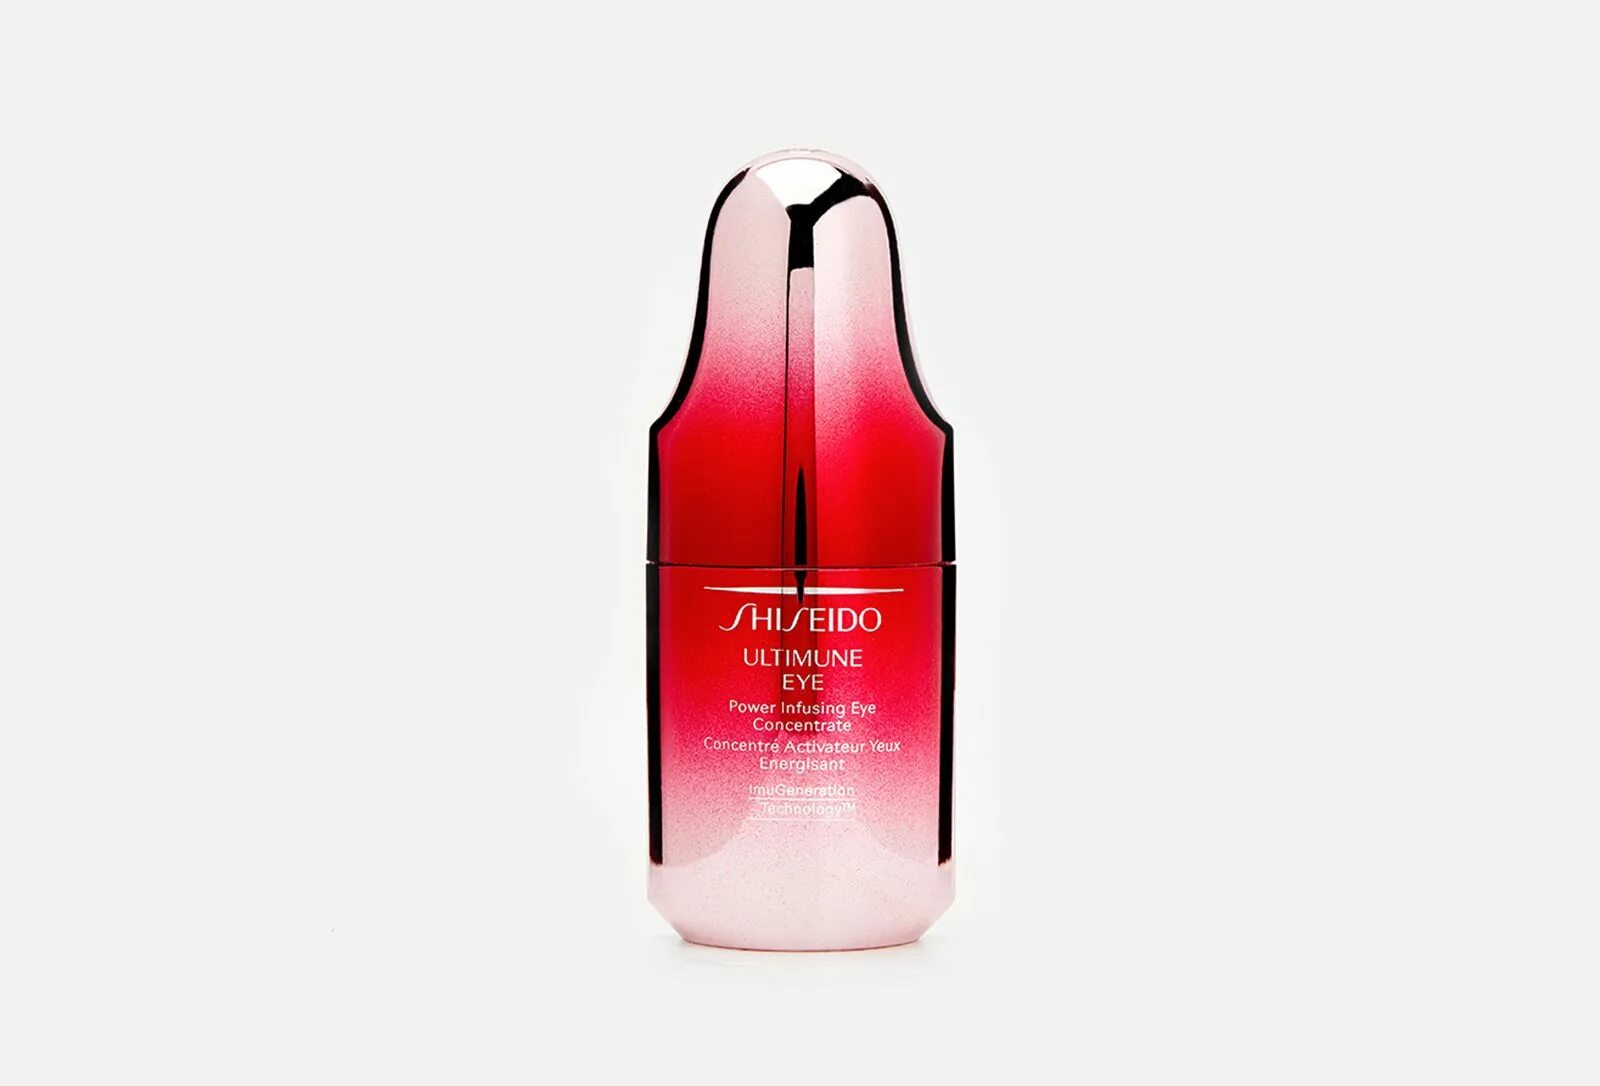 Shiseido power infusing concentrate. Ultimune концентрат шисейдо Power infusing. Концентрат Shiseido Ultimune Power infusing Concentrate. Shiseido Ultimate Power infusing. Shiseido Ultimate Serum.